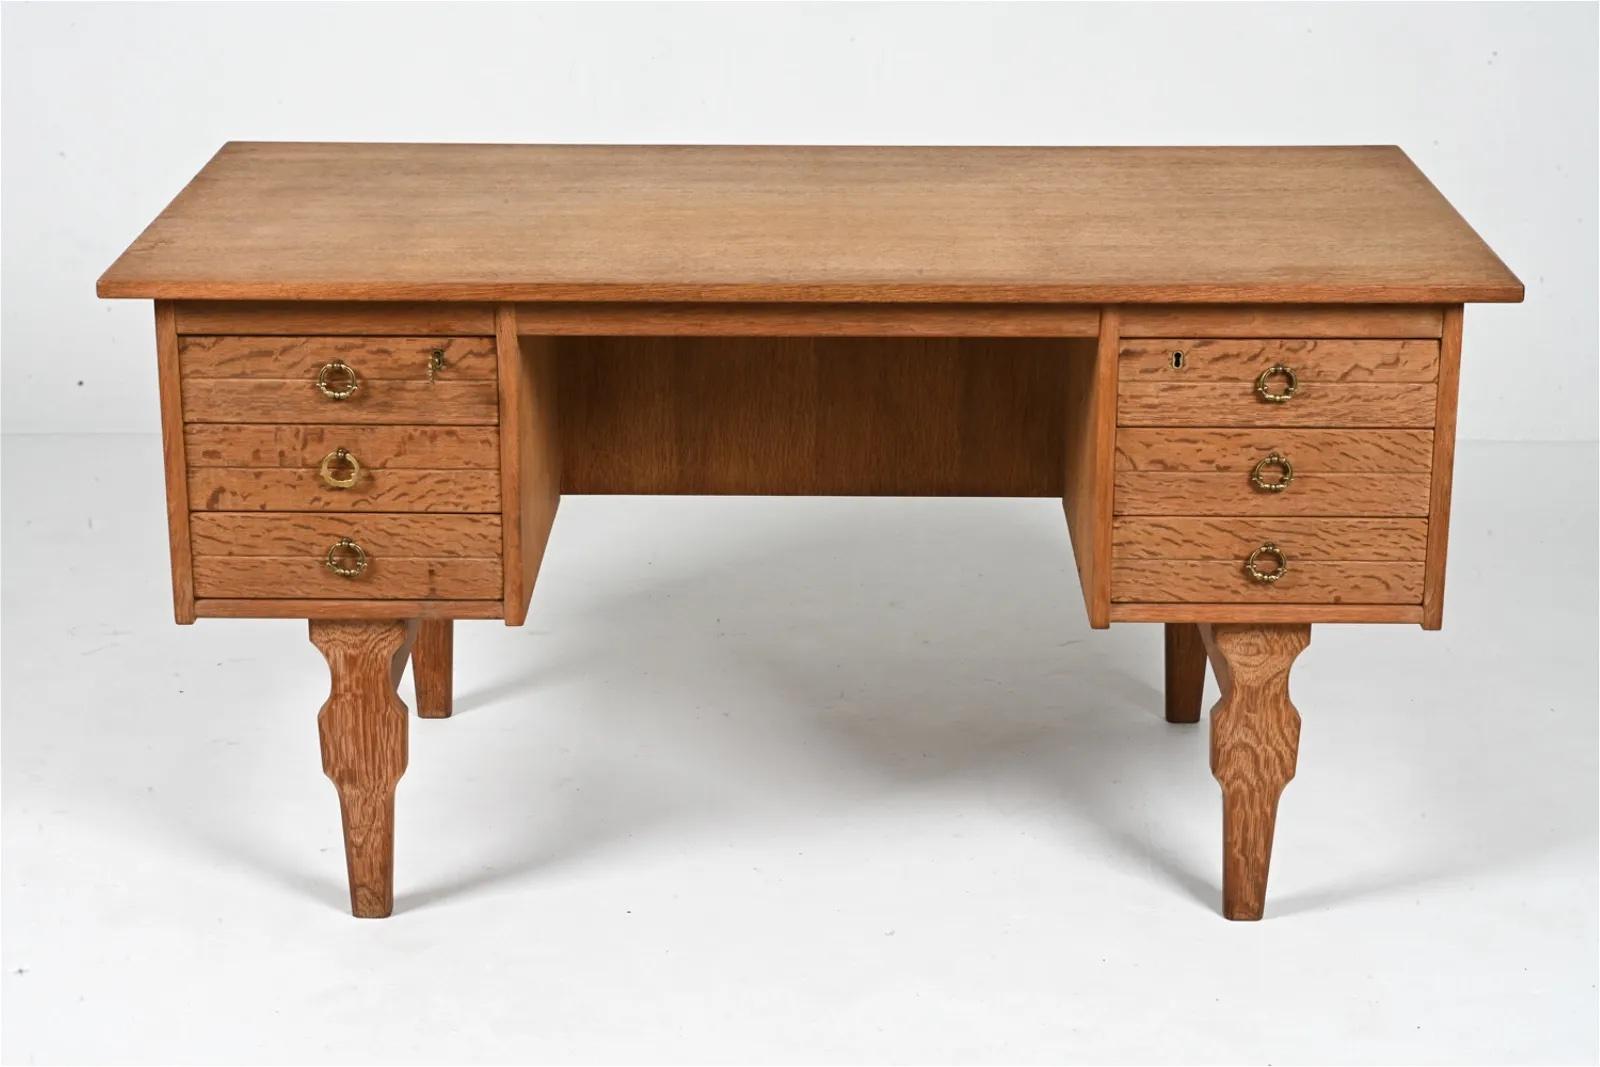 Exceptional executive desk in quarter-sawn white oak, featuring gothic-inspired panel moldings, a scalloped apron and thick sculpted legs.
Six dovetailed drawers on one side and a lockable cabinet flanked by two alcoves on the reverse